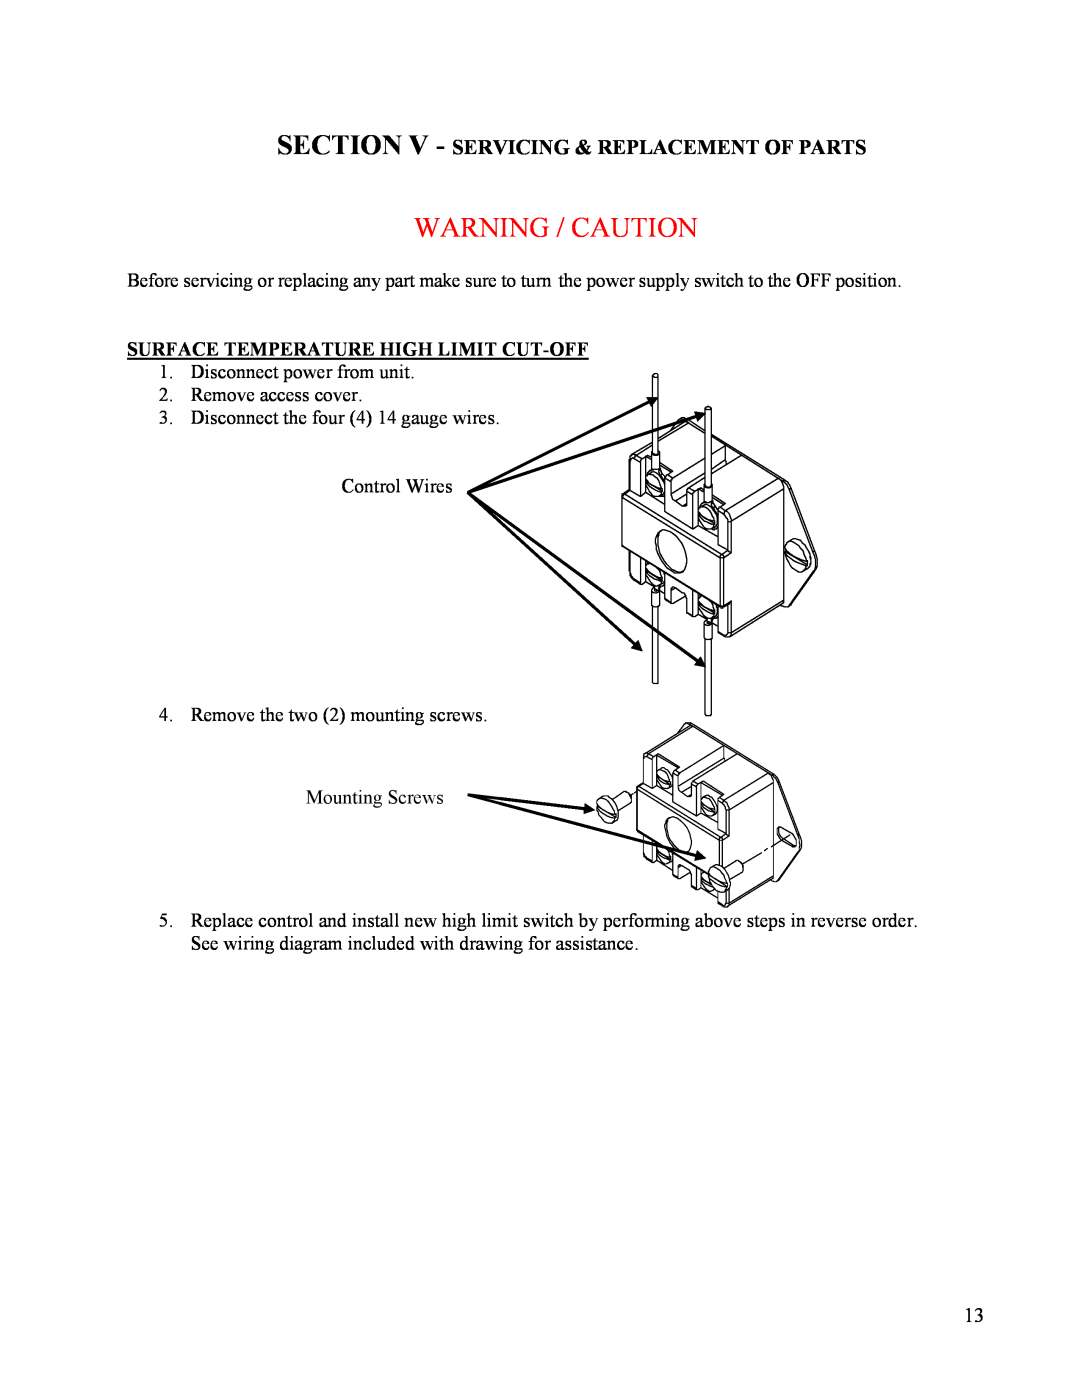 Hubbell Electric Heater Company EMV manual Section V - Servicing & Replacement Of Parts, Warning / Caution 